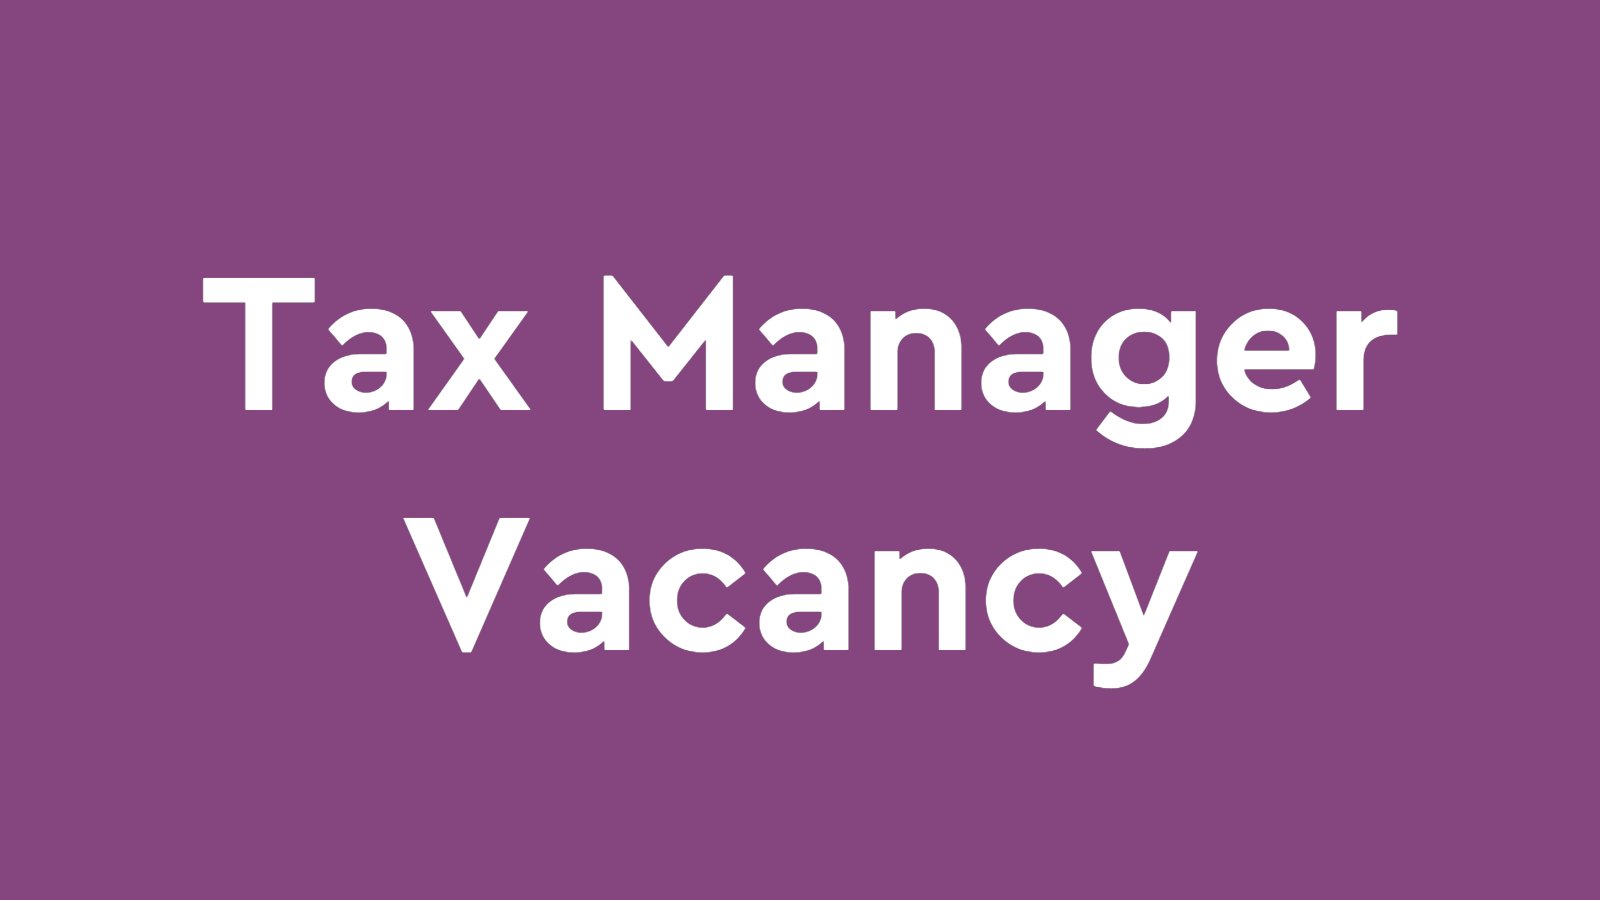 CRITCHLEYS CAREERS: Tax Manager Job